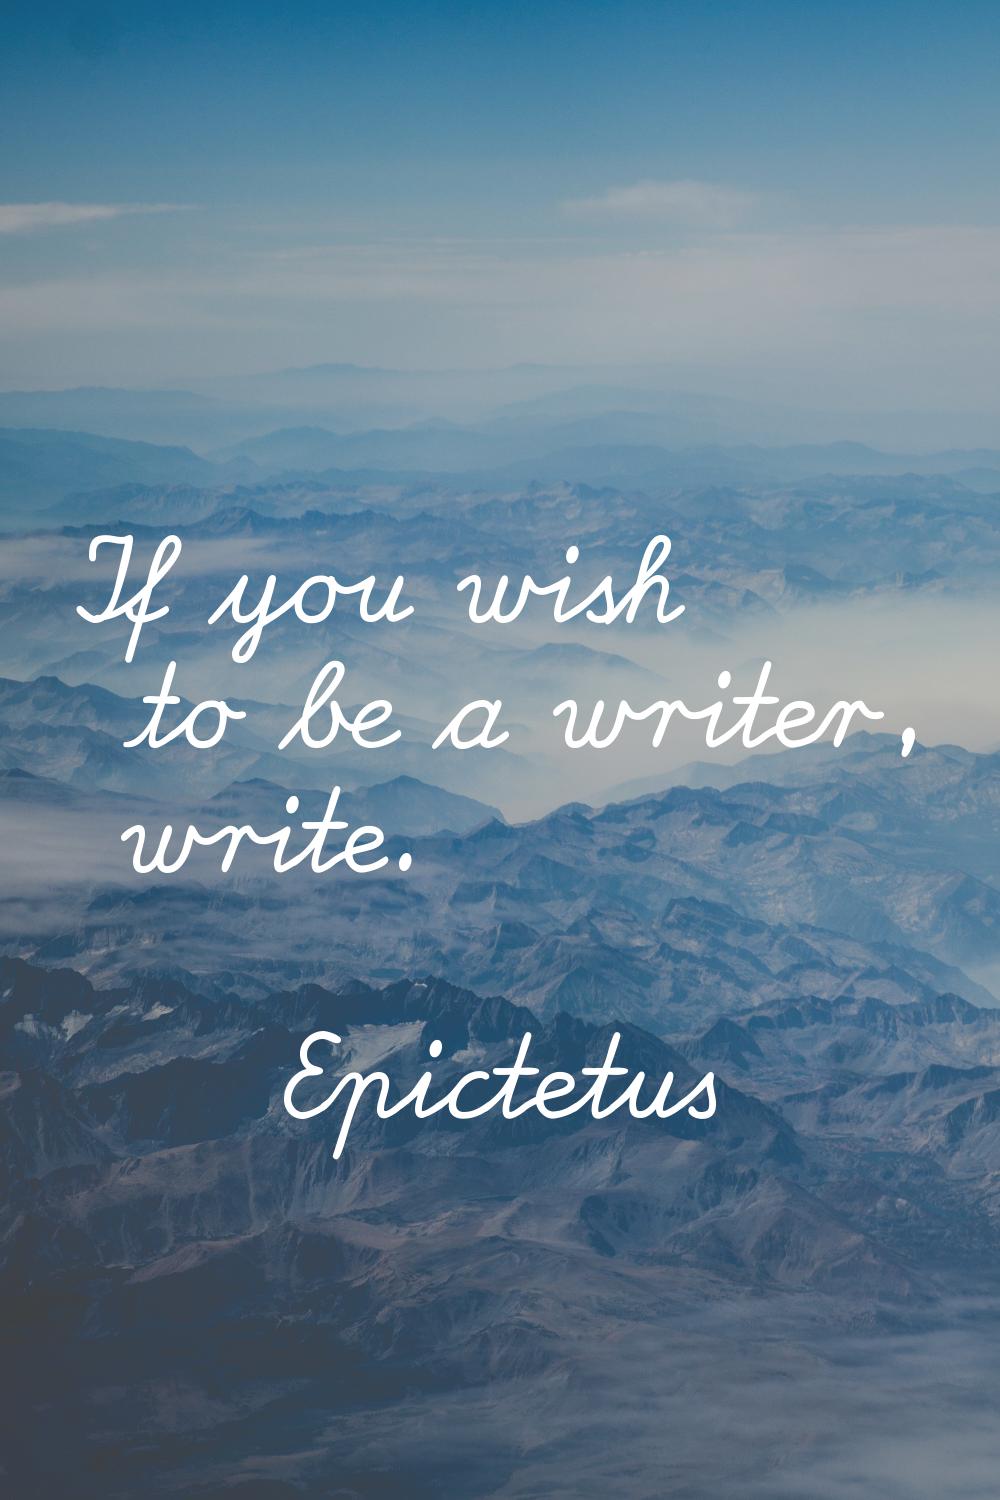 If you wish to be a writer, write.